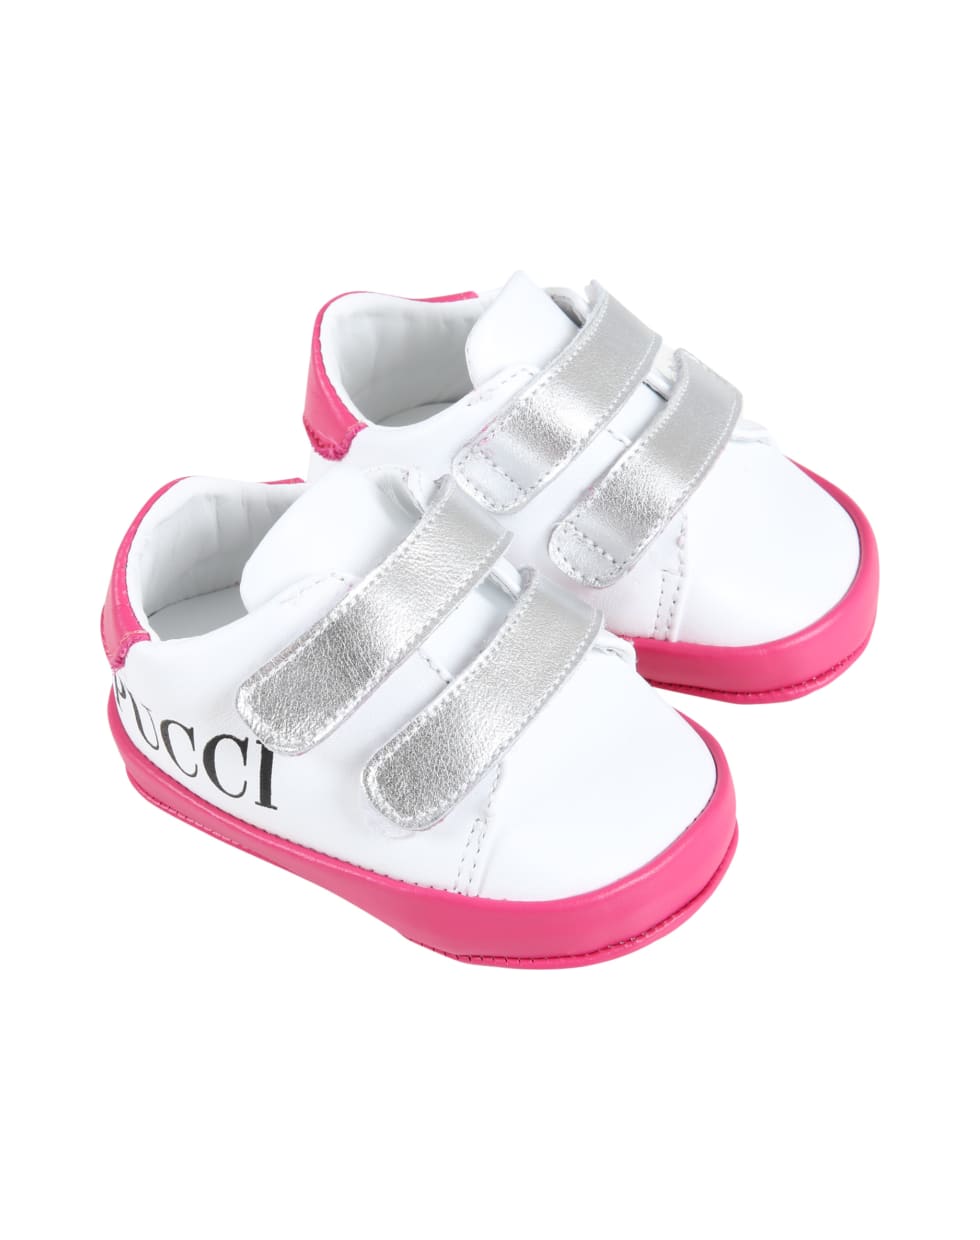 Emilio Pucci Multicolor Sneakers For Baby Girl - White